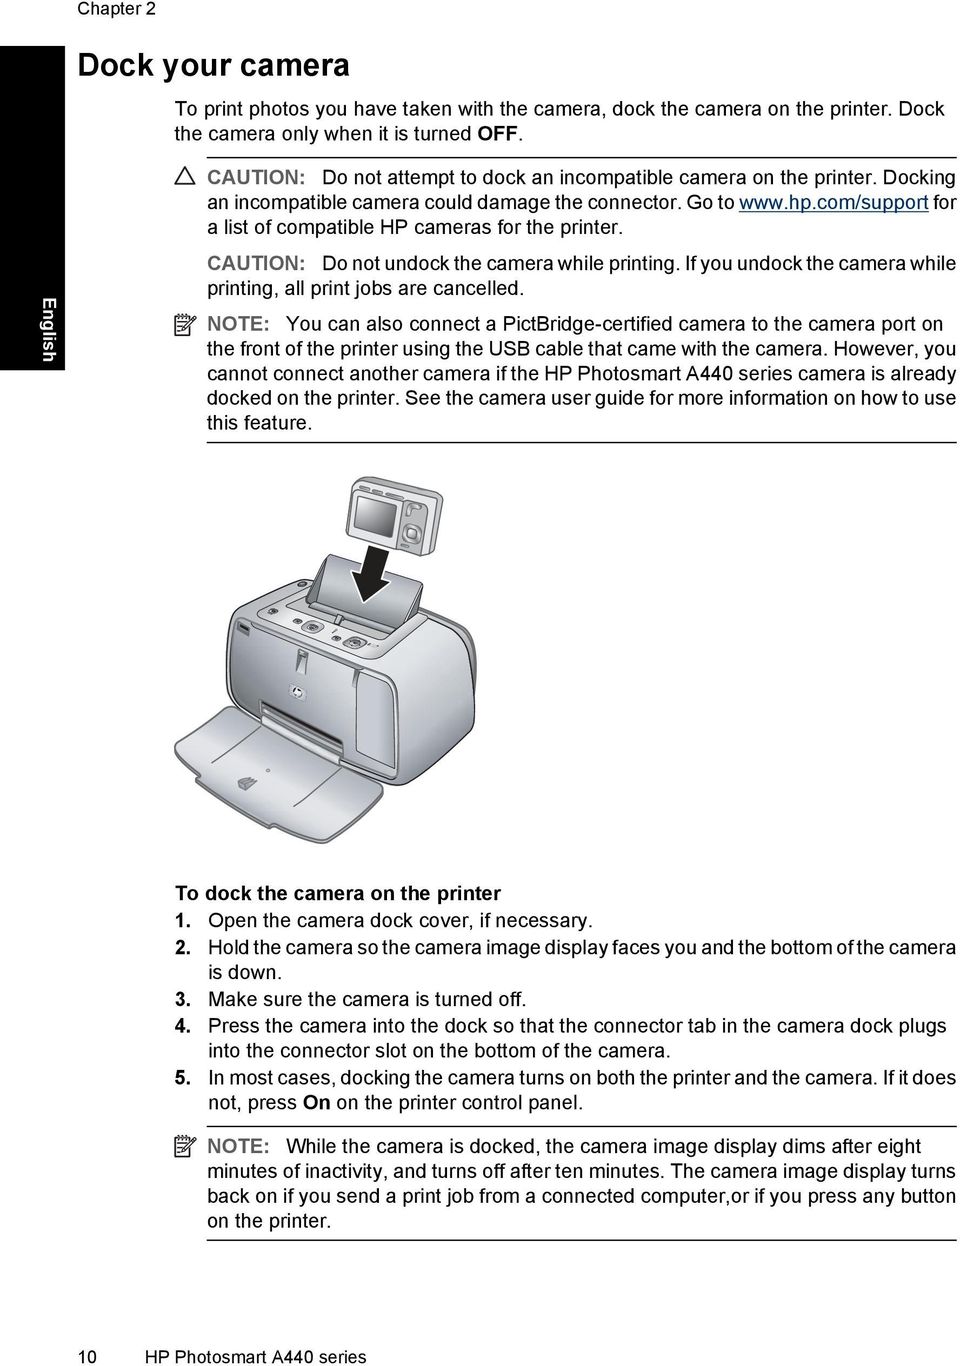 com/support for a list of compatible HP cameras for the printer. CAUTION: Do not undock the camera while printing. If you undock the camera while printing, all print jobs are cancelled.